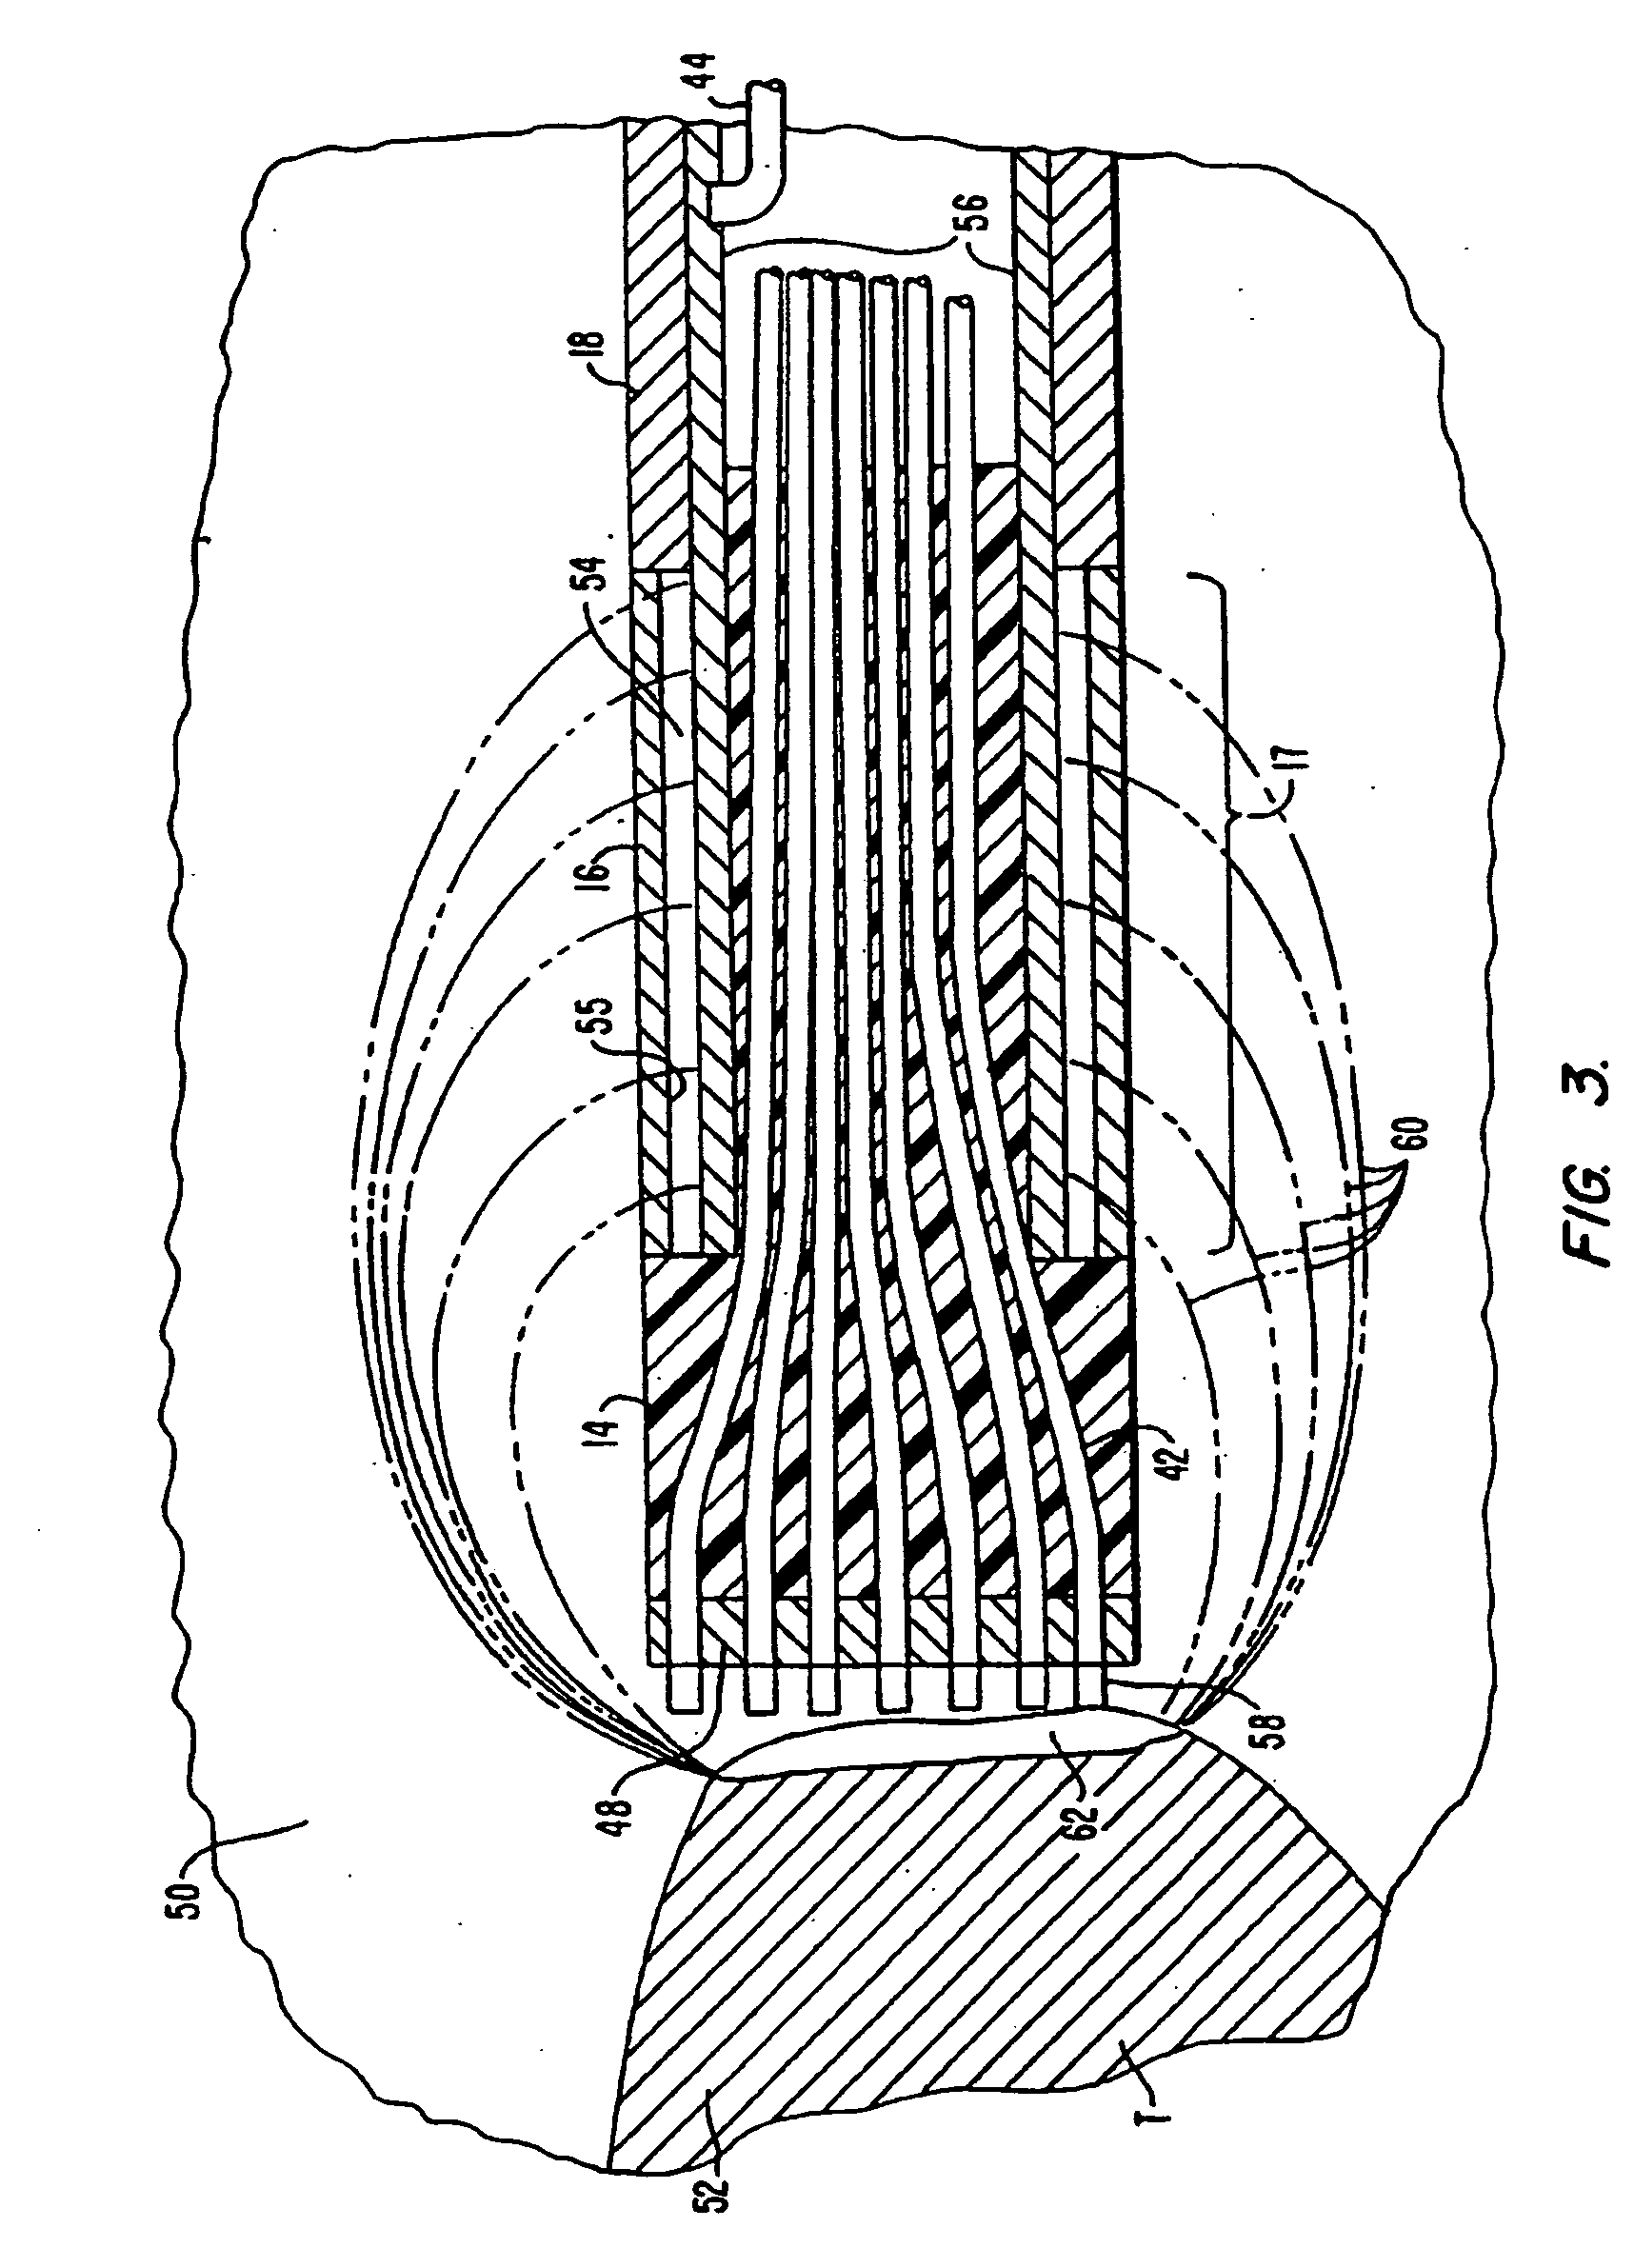 Methods for electrosurgical tissue treatment between spaced apart electrodes